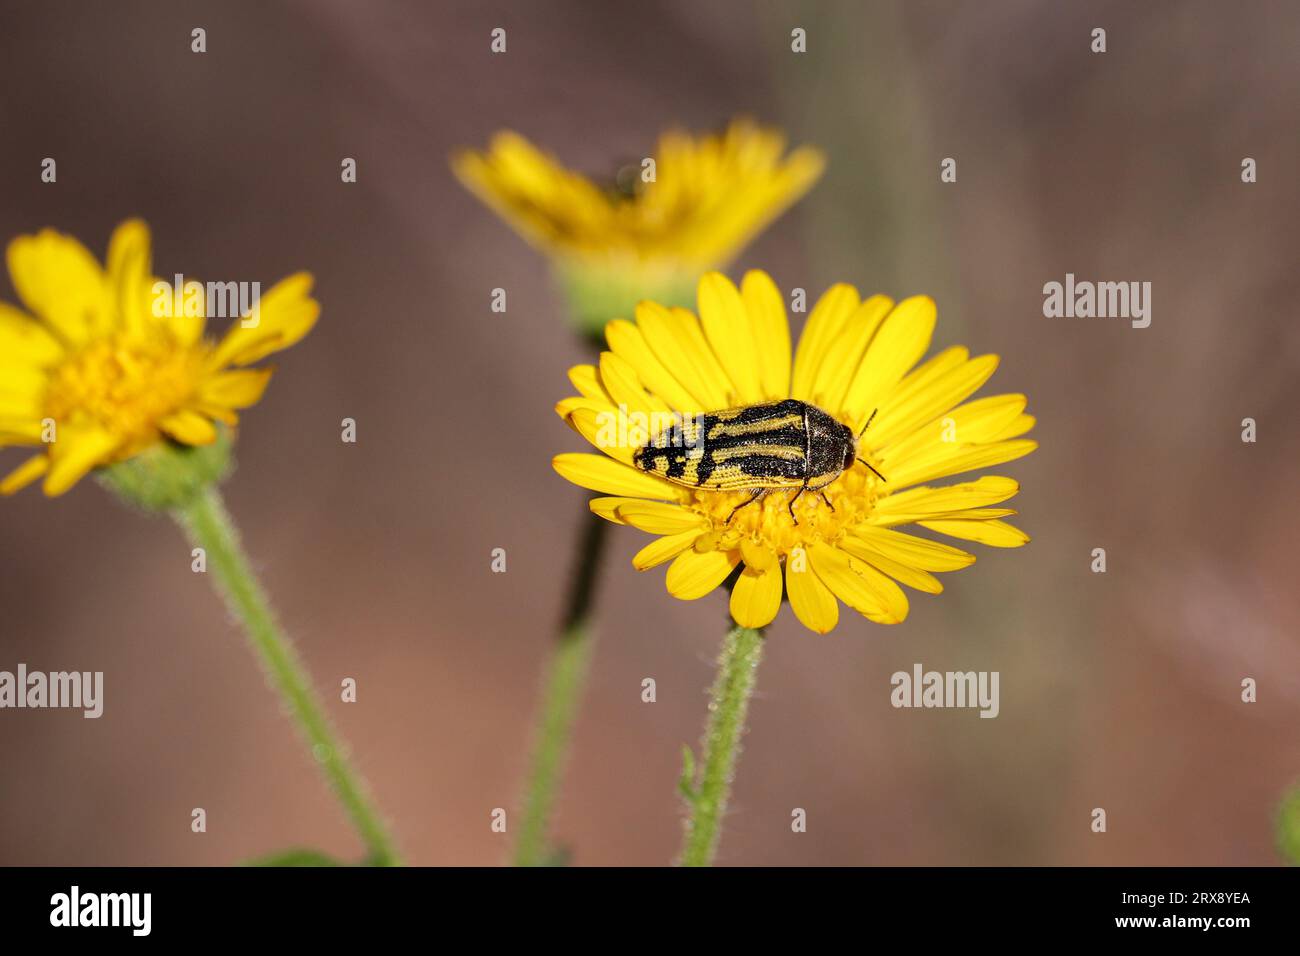 Metallic woodborer beetle or Acmaeodera feeding on a yellow aster flower at Rumsey Park in Payson, Arizona. Stock Photo